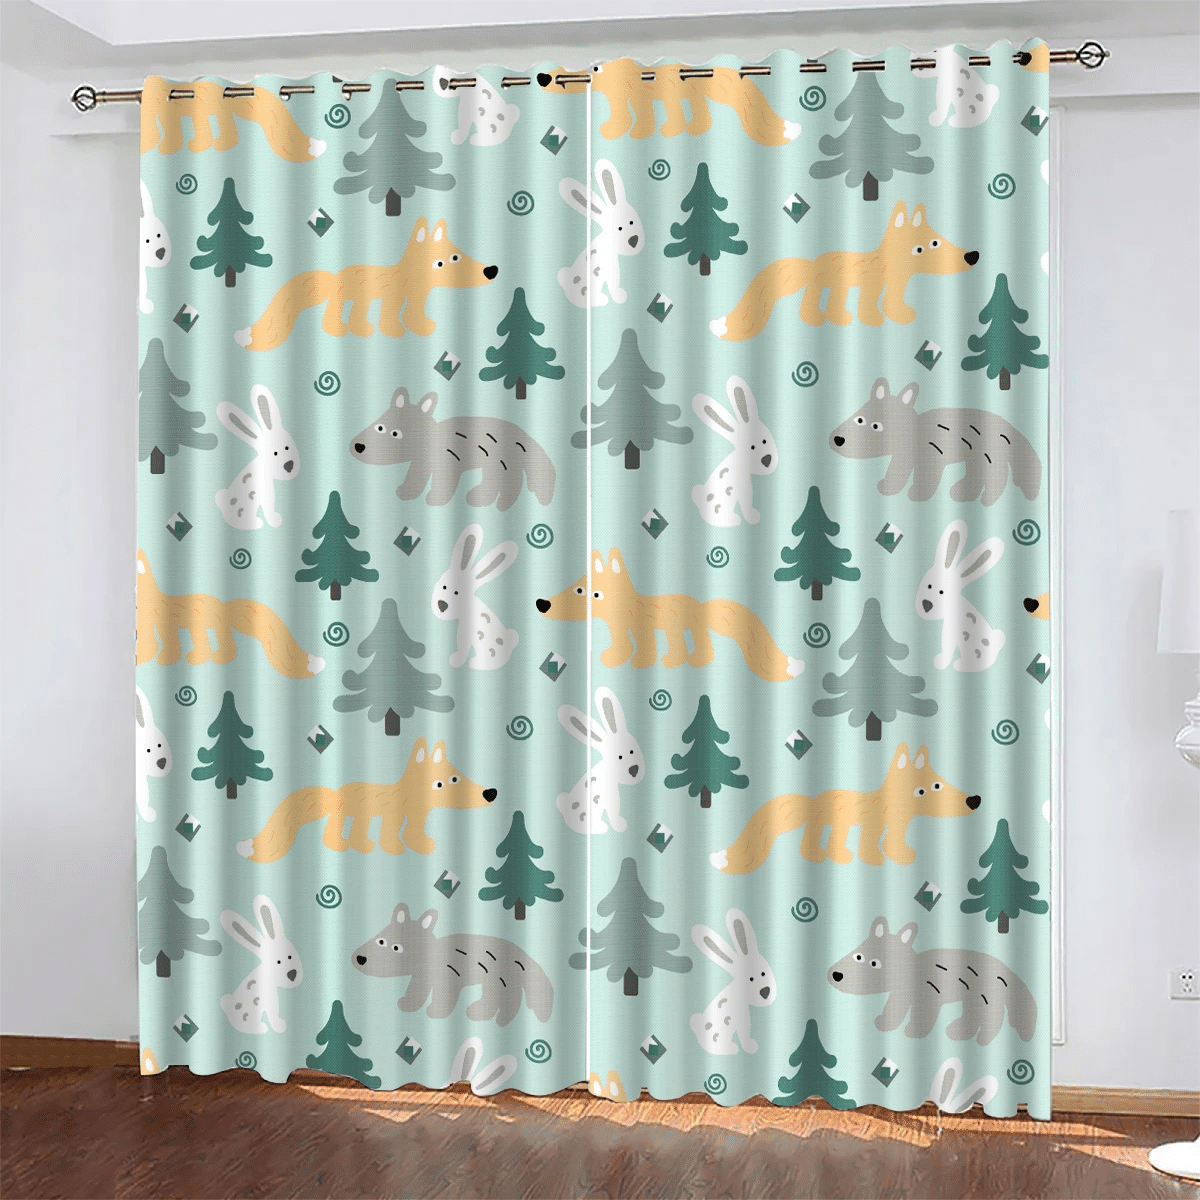 Christmas Trees And Wolf On A Light Background Window Curtains Door Curtains Home Decor